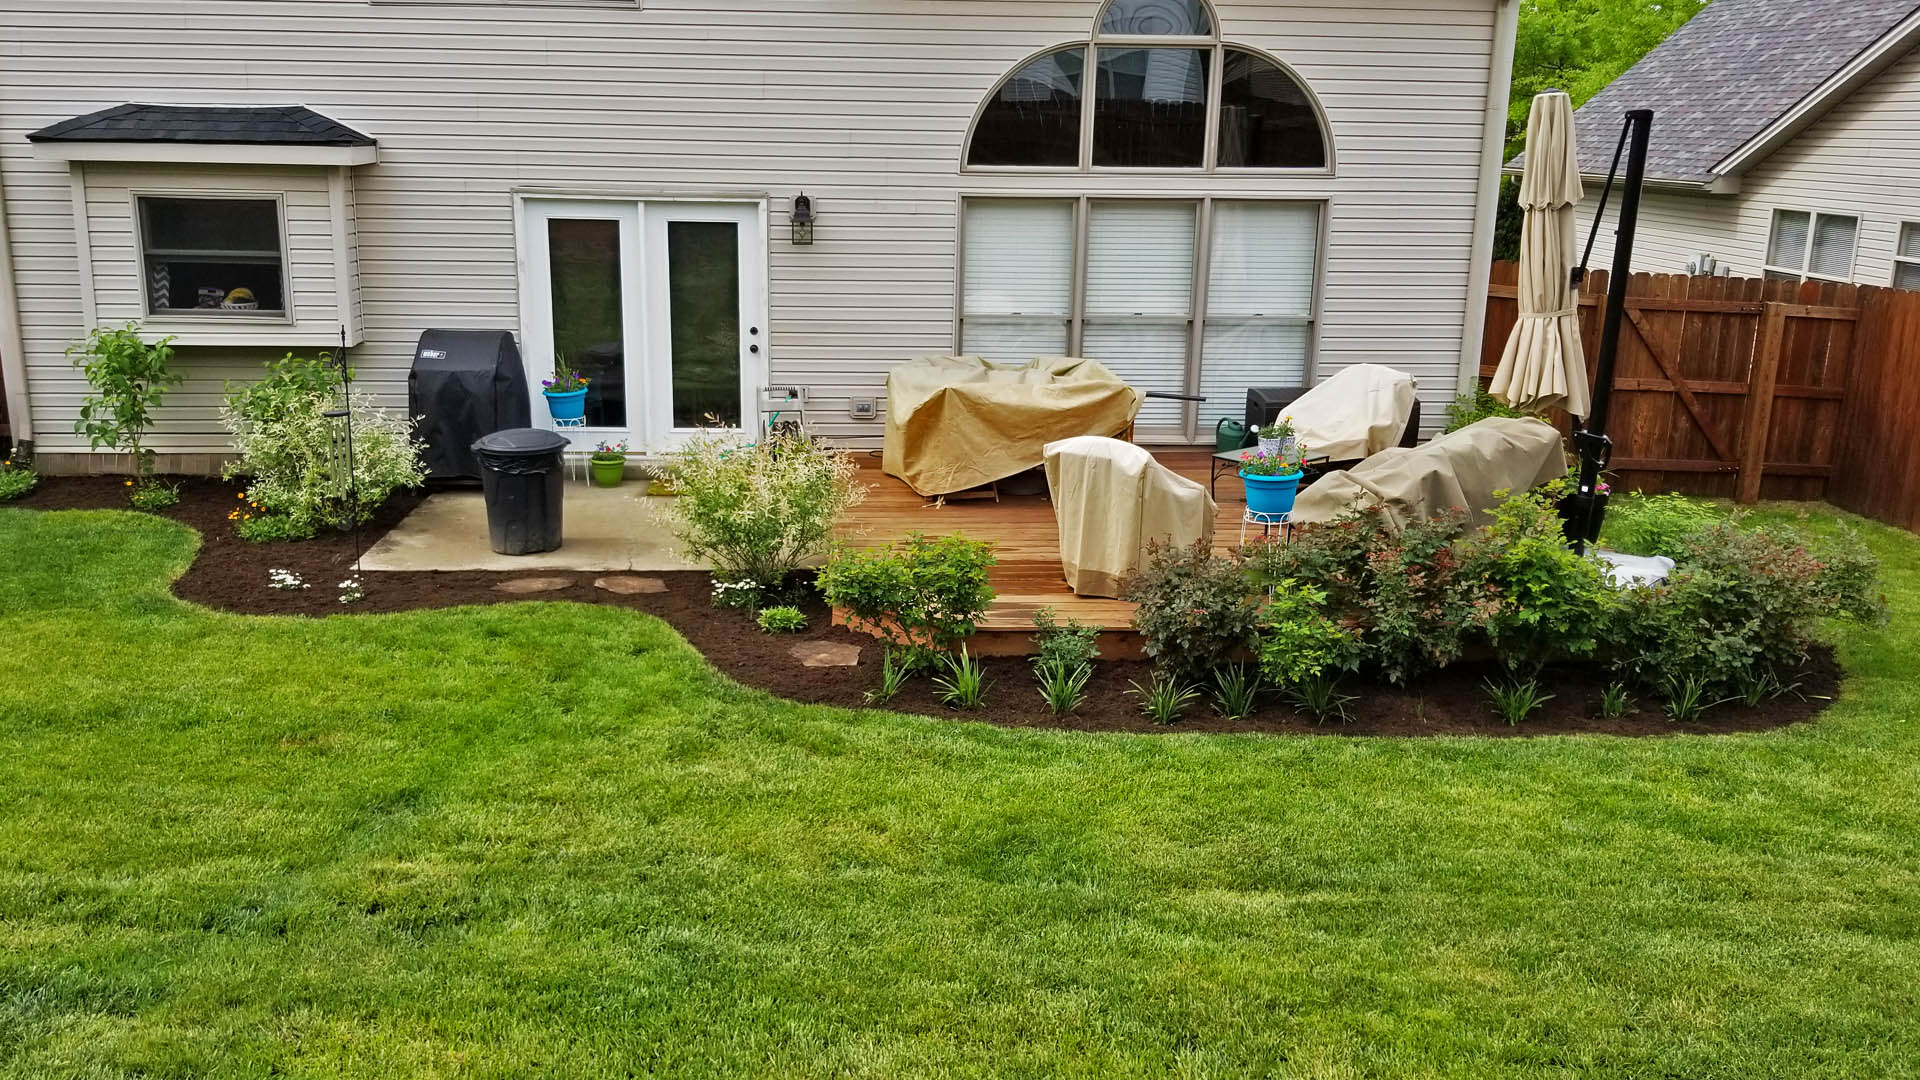 Landscaping project by Allen's Lawn Service in Lexington, KY.